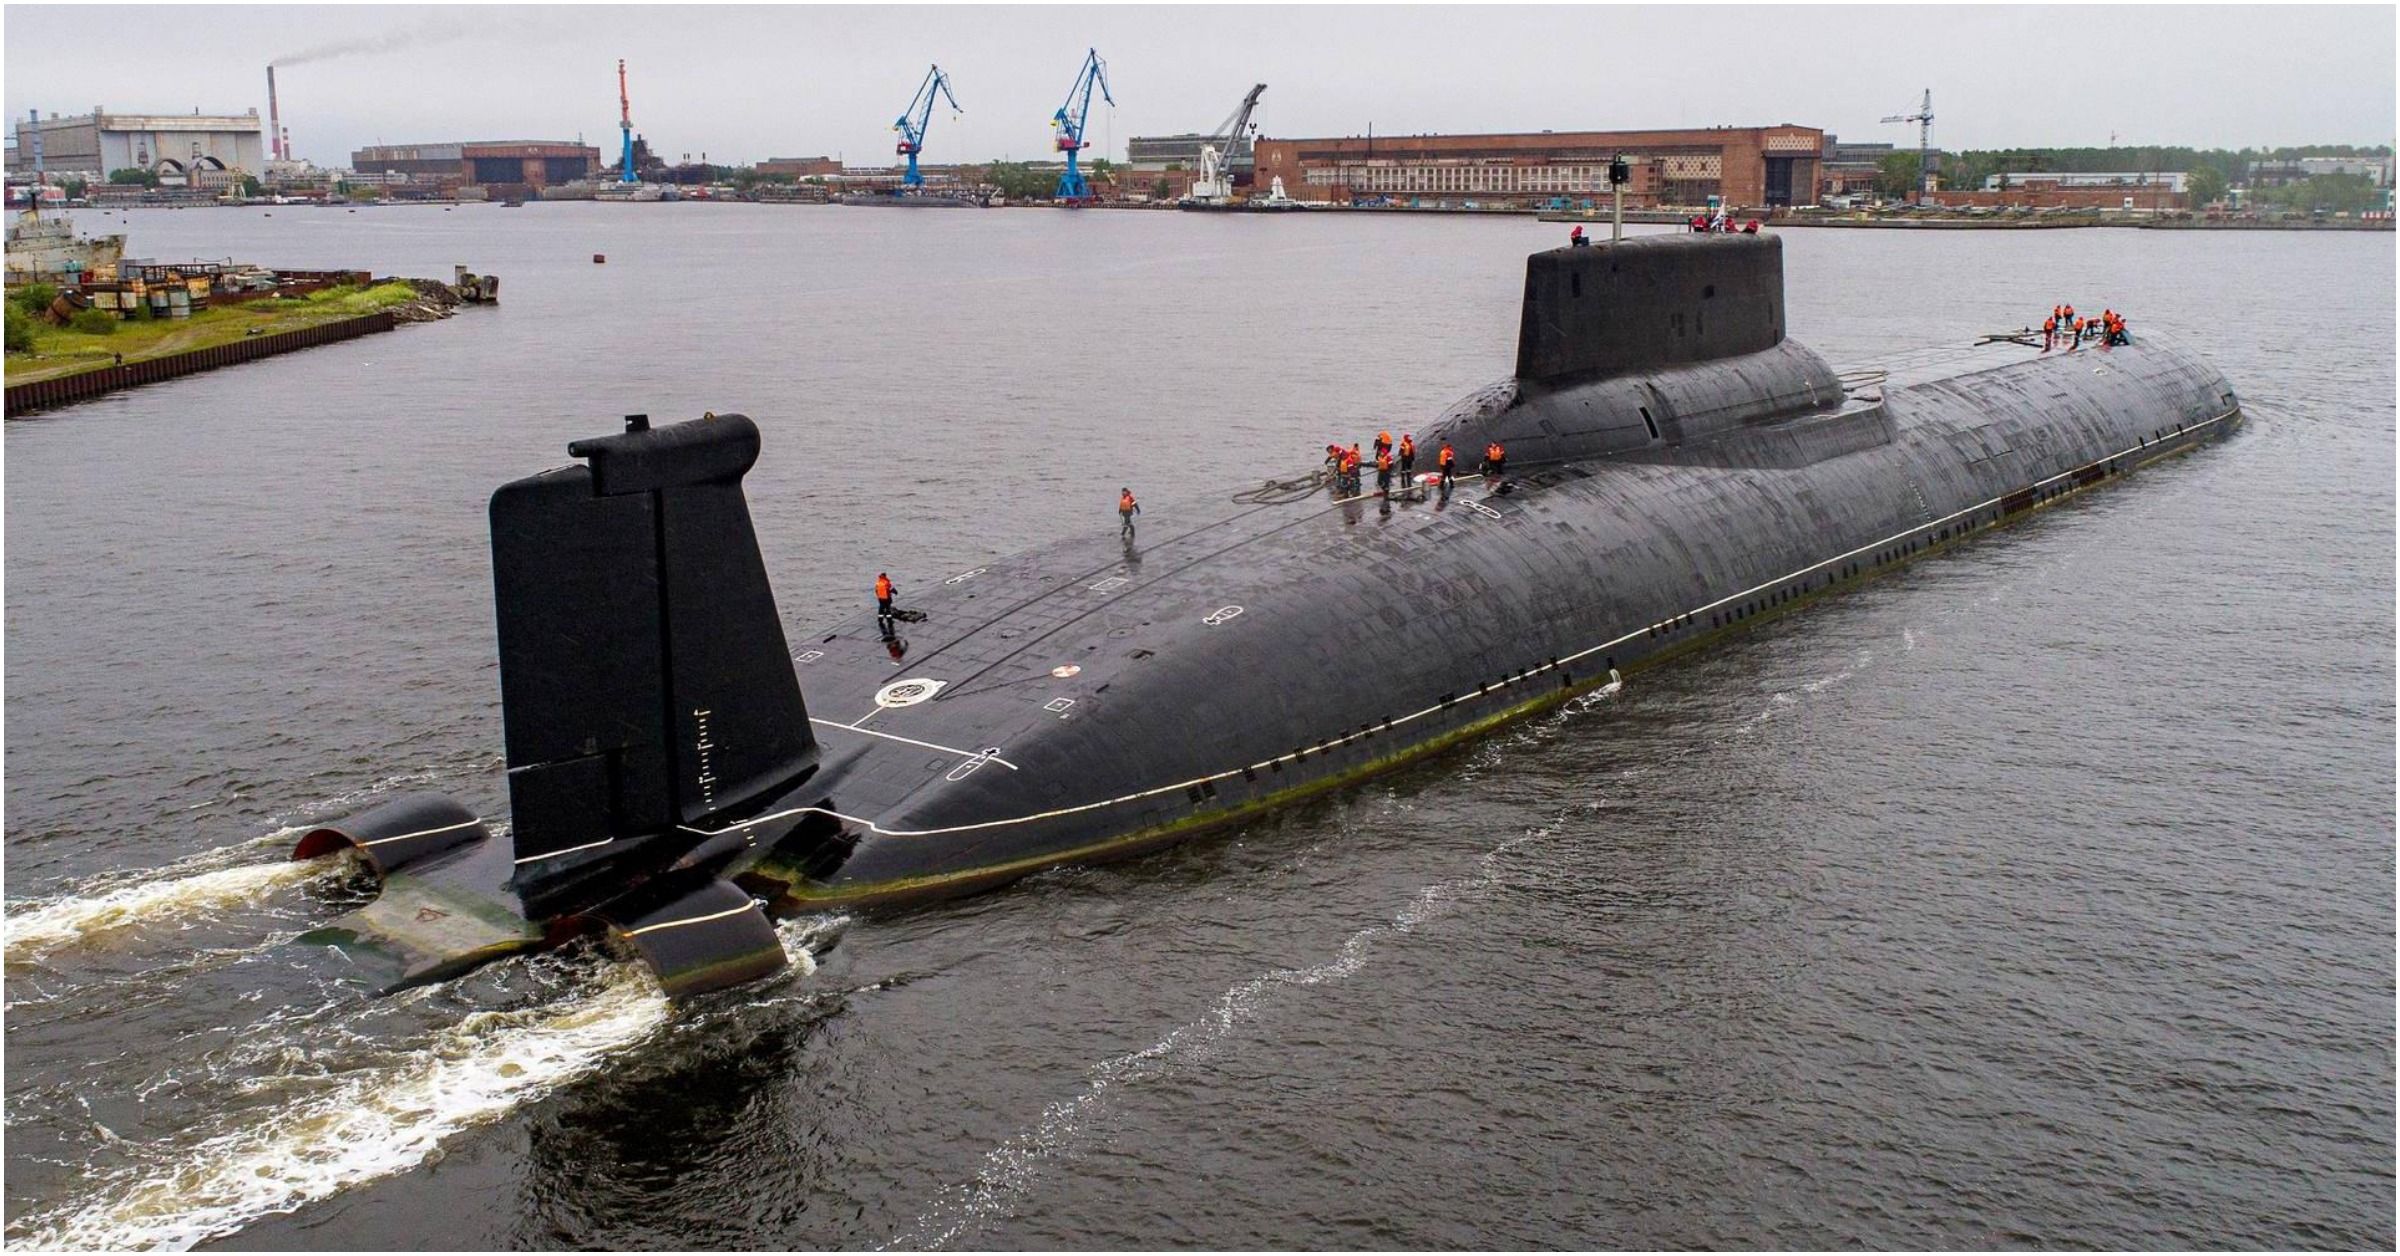 These are the world's largest military submarines.